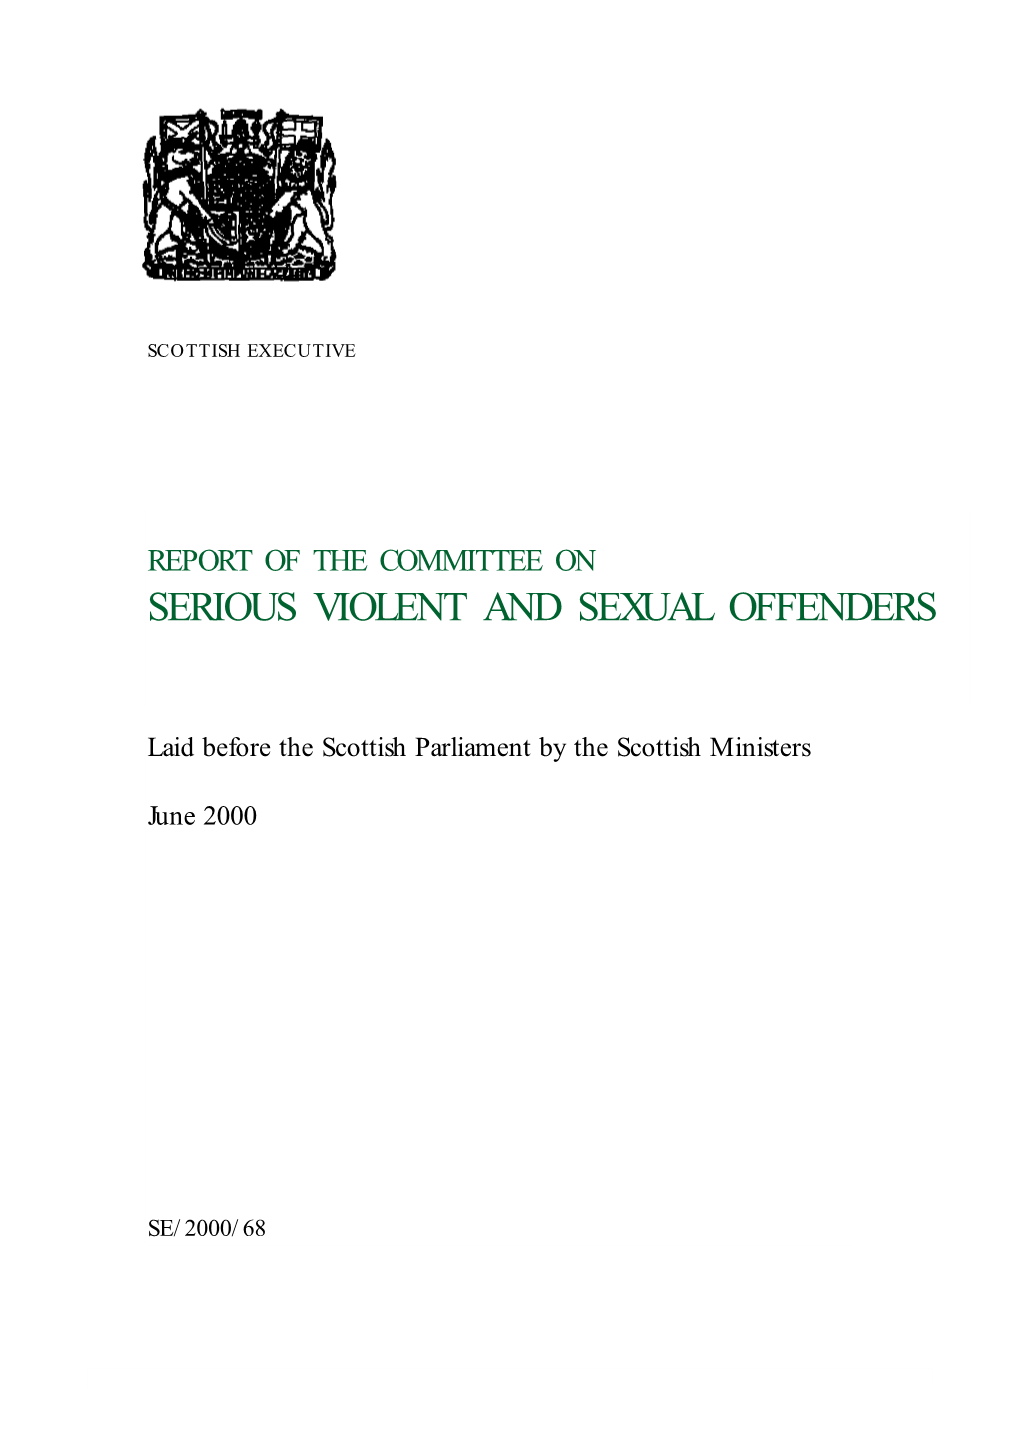 Report of the Committee on Serious Violent and Sexual Offenders